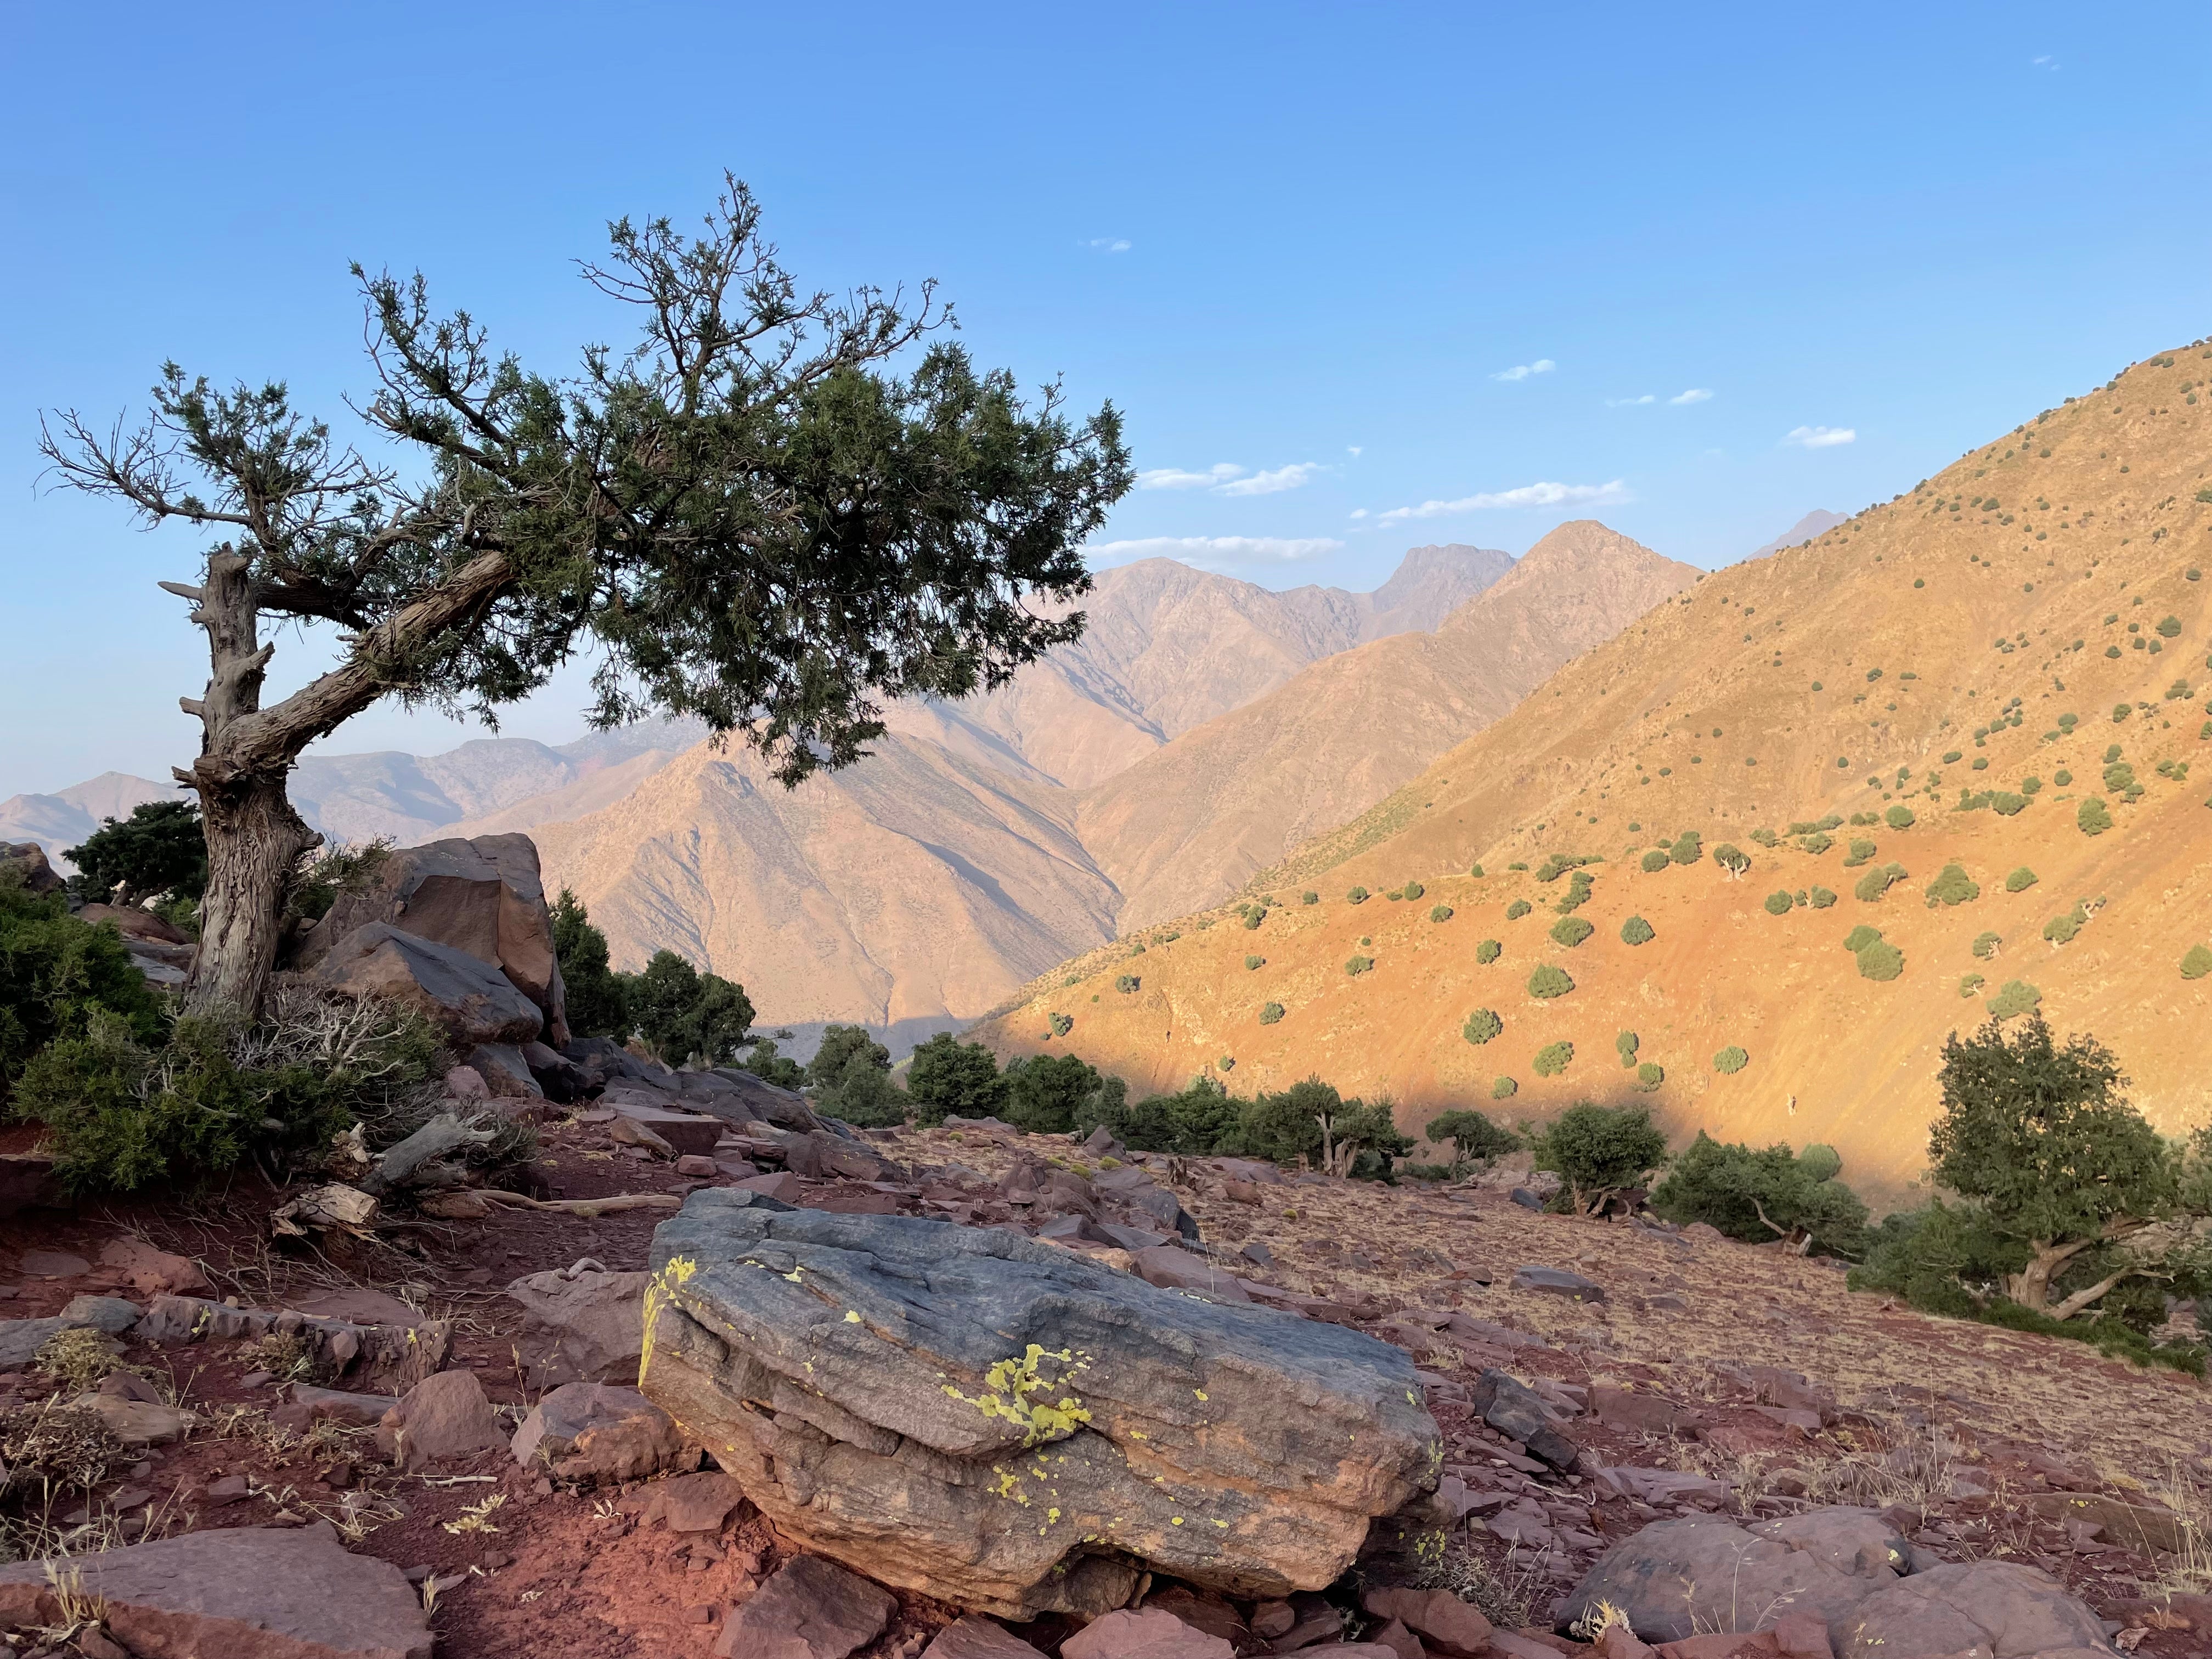 Alice often hikes in the Atlas Mountains where temperatures often reach the 30s and 40s